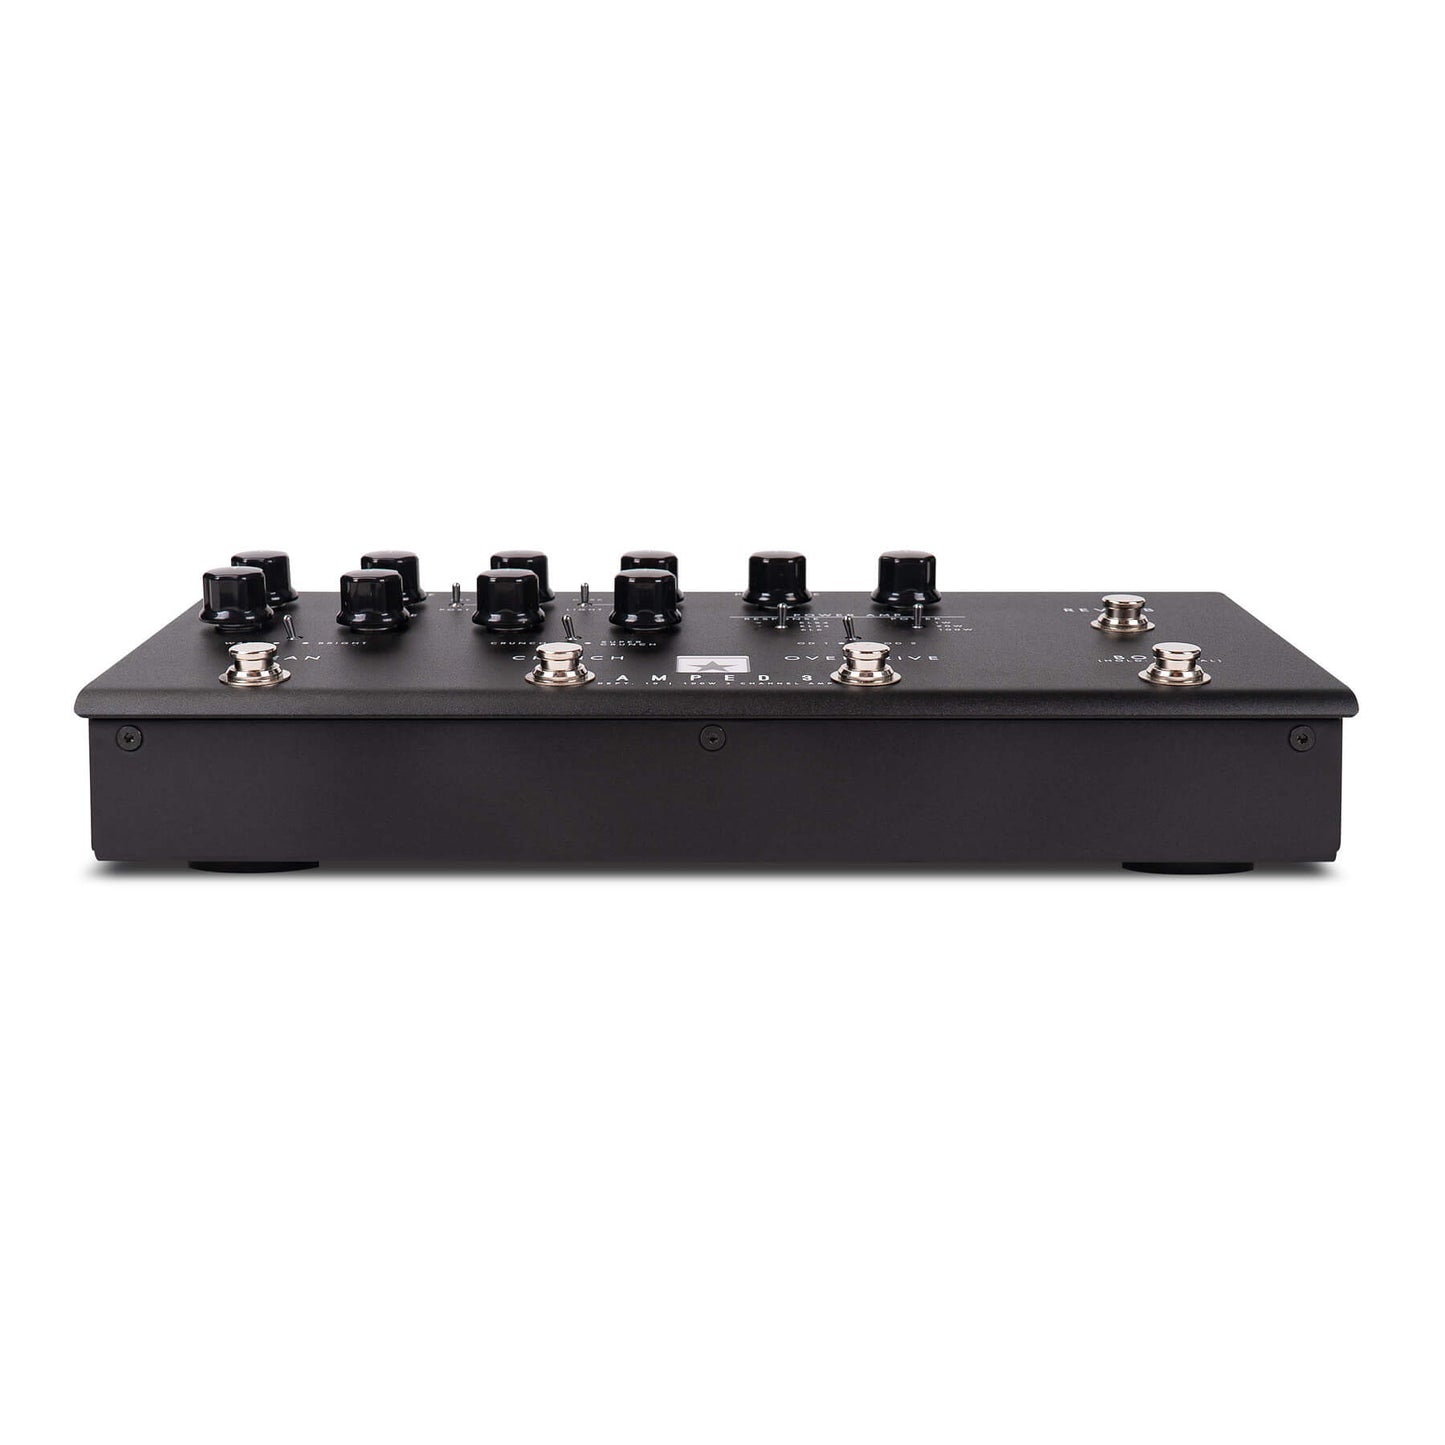 Blackstar Dept. 10 AMPED 3 Multi-Channel with High-Gain Amp Pedal - Black (Each)